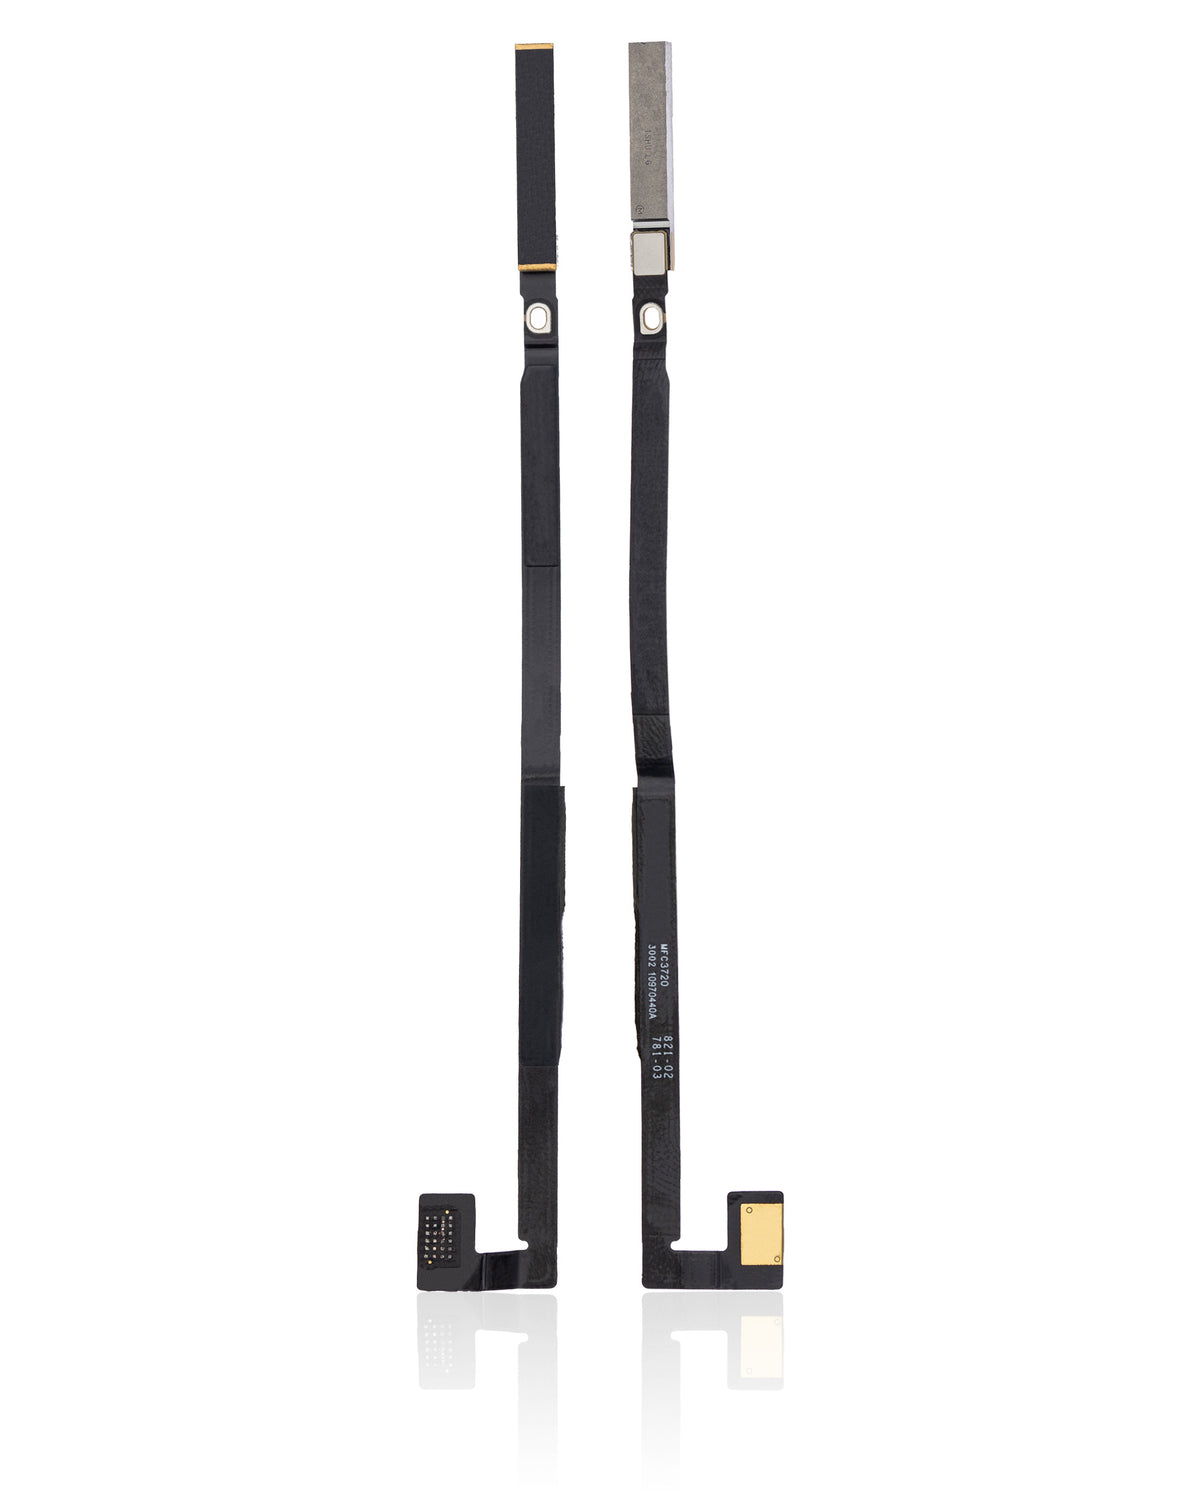 5G MODULE WITH UW ANTENNA FLEX FOR IPHONE 12 PRO MAX